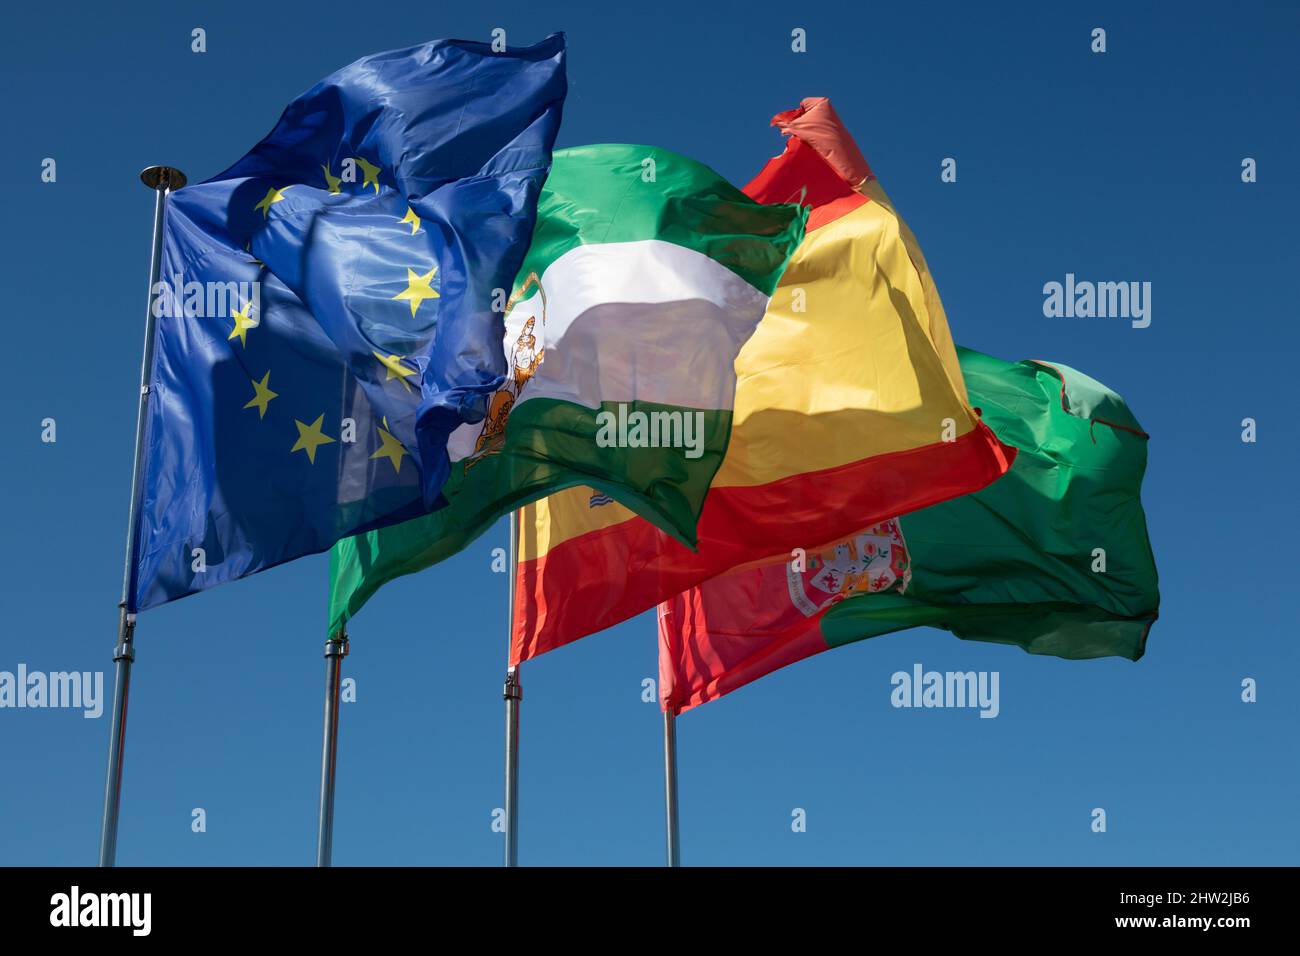 The flags of the EU, Spain, Andalusia and the city of Granada fly from the roof of the Alhambra in Granada, Spain. Stock Photo